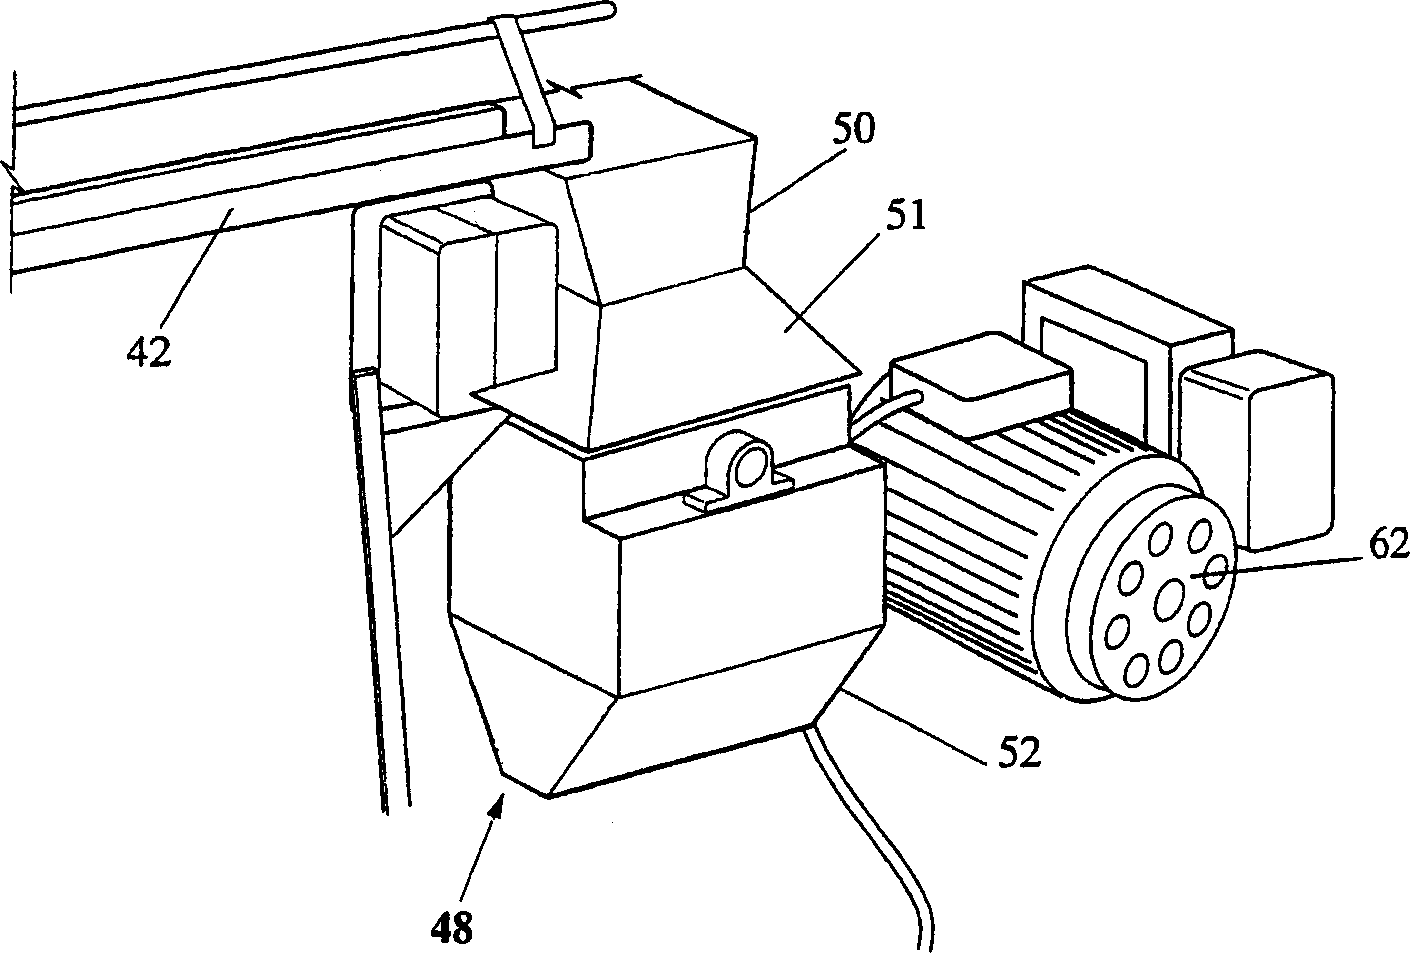 Method and apparatus for the manufacture of meat analogue product